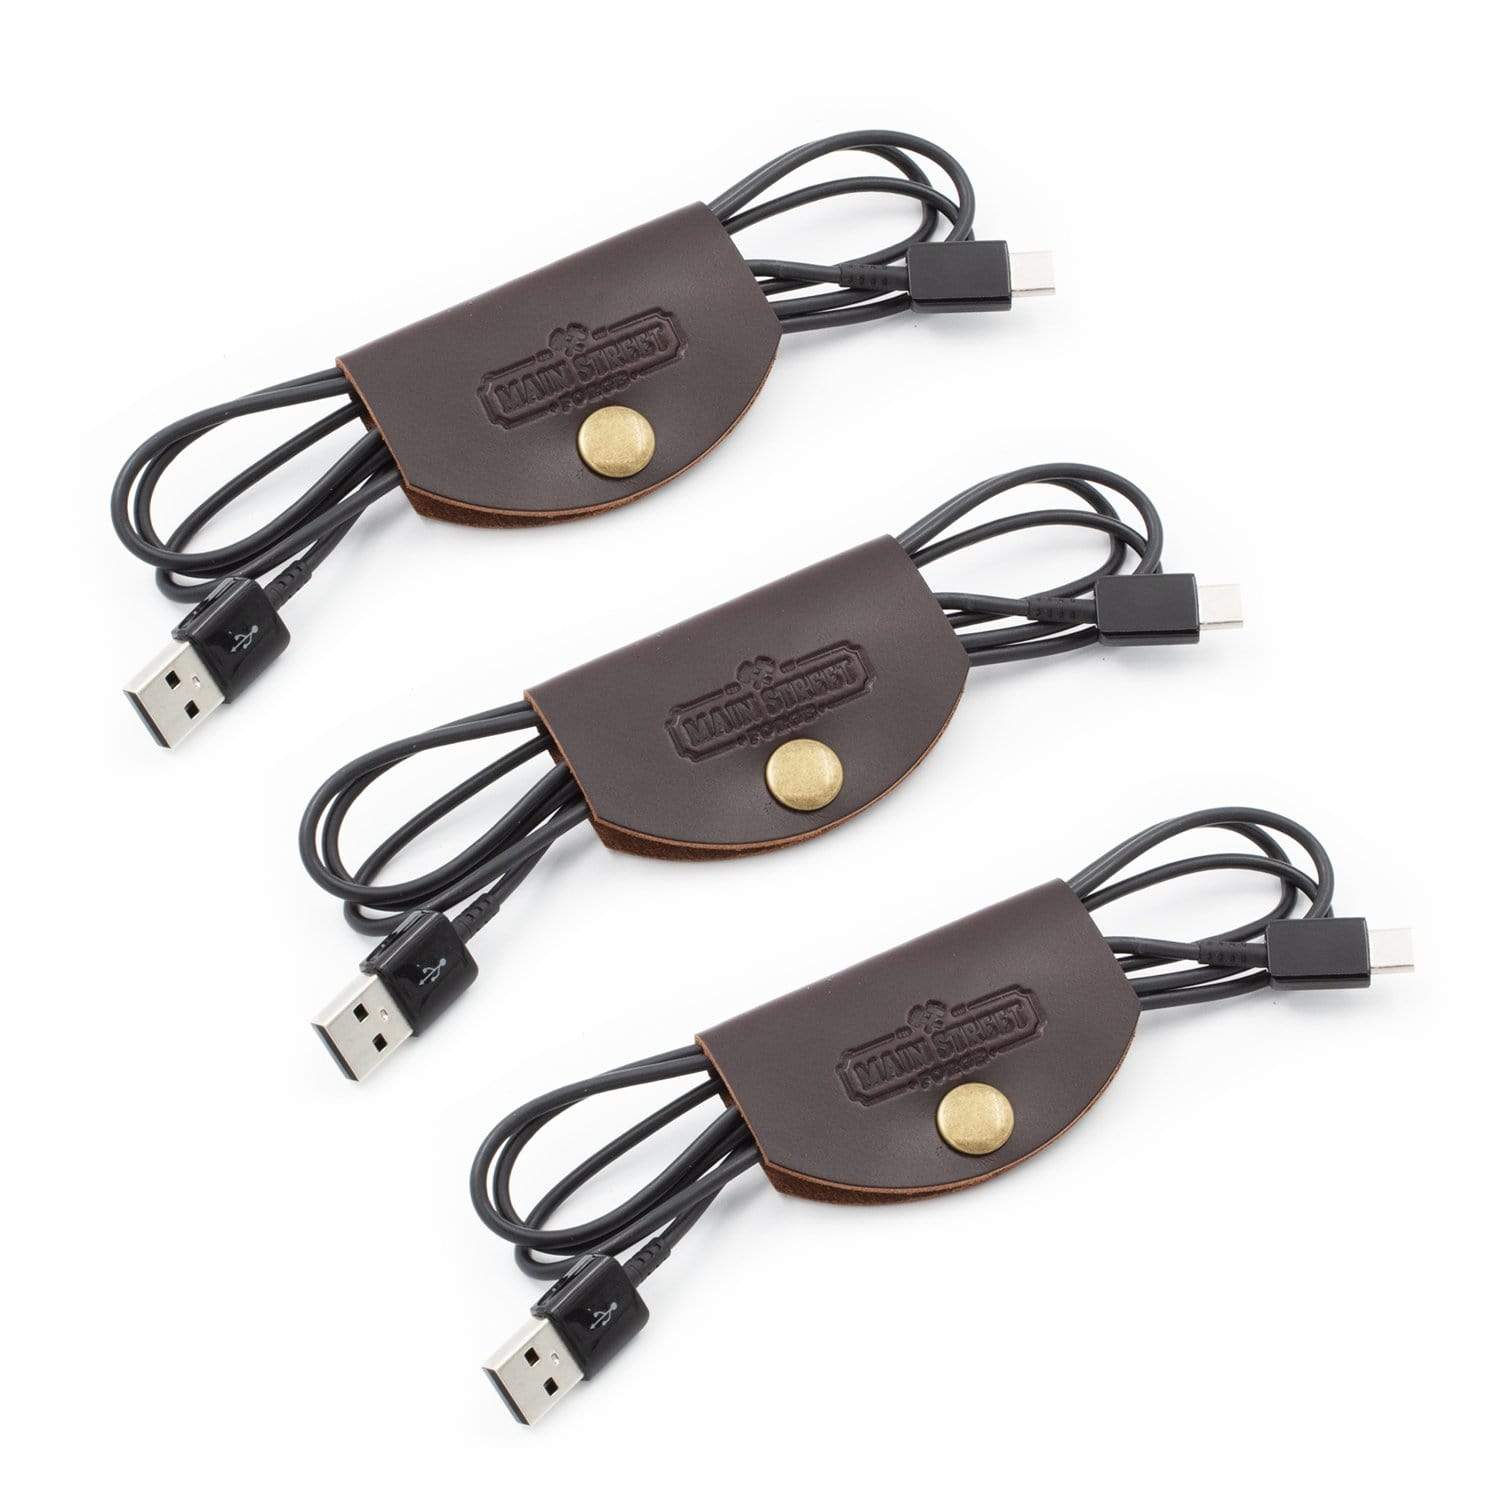 Cable Organizer Cute Small Cord Wraps Vegan Leather Cord 